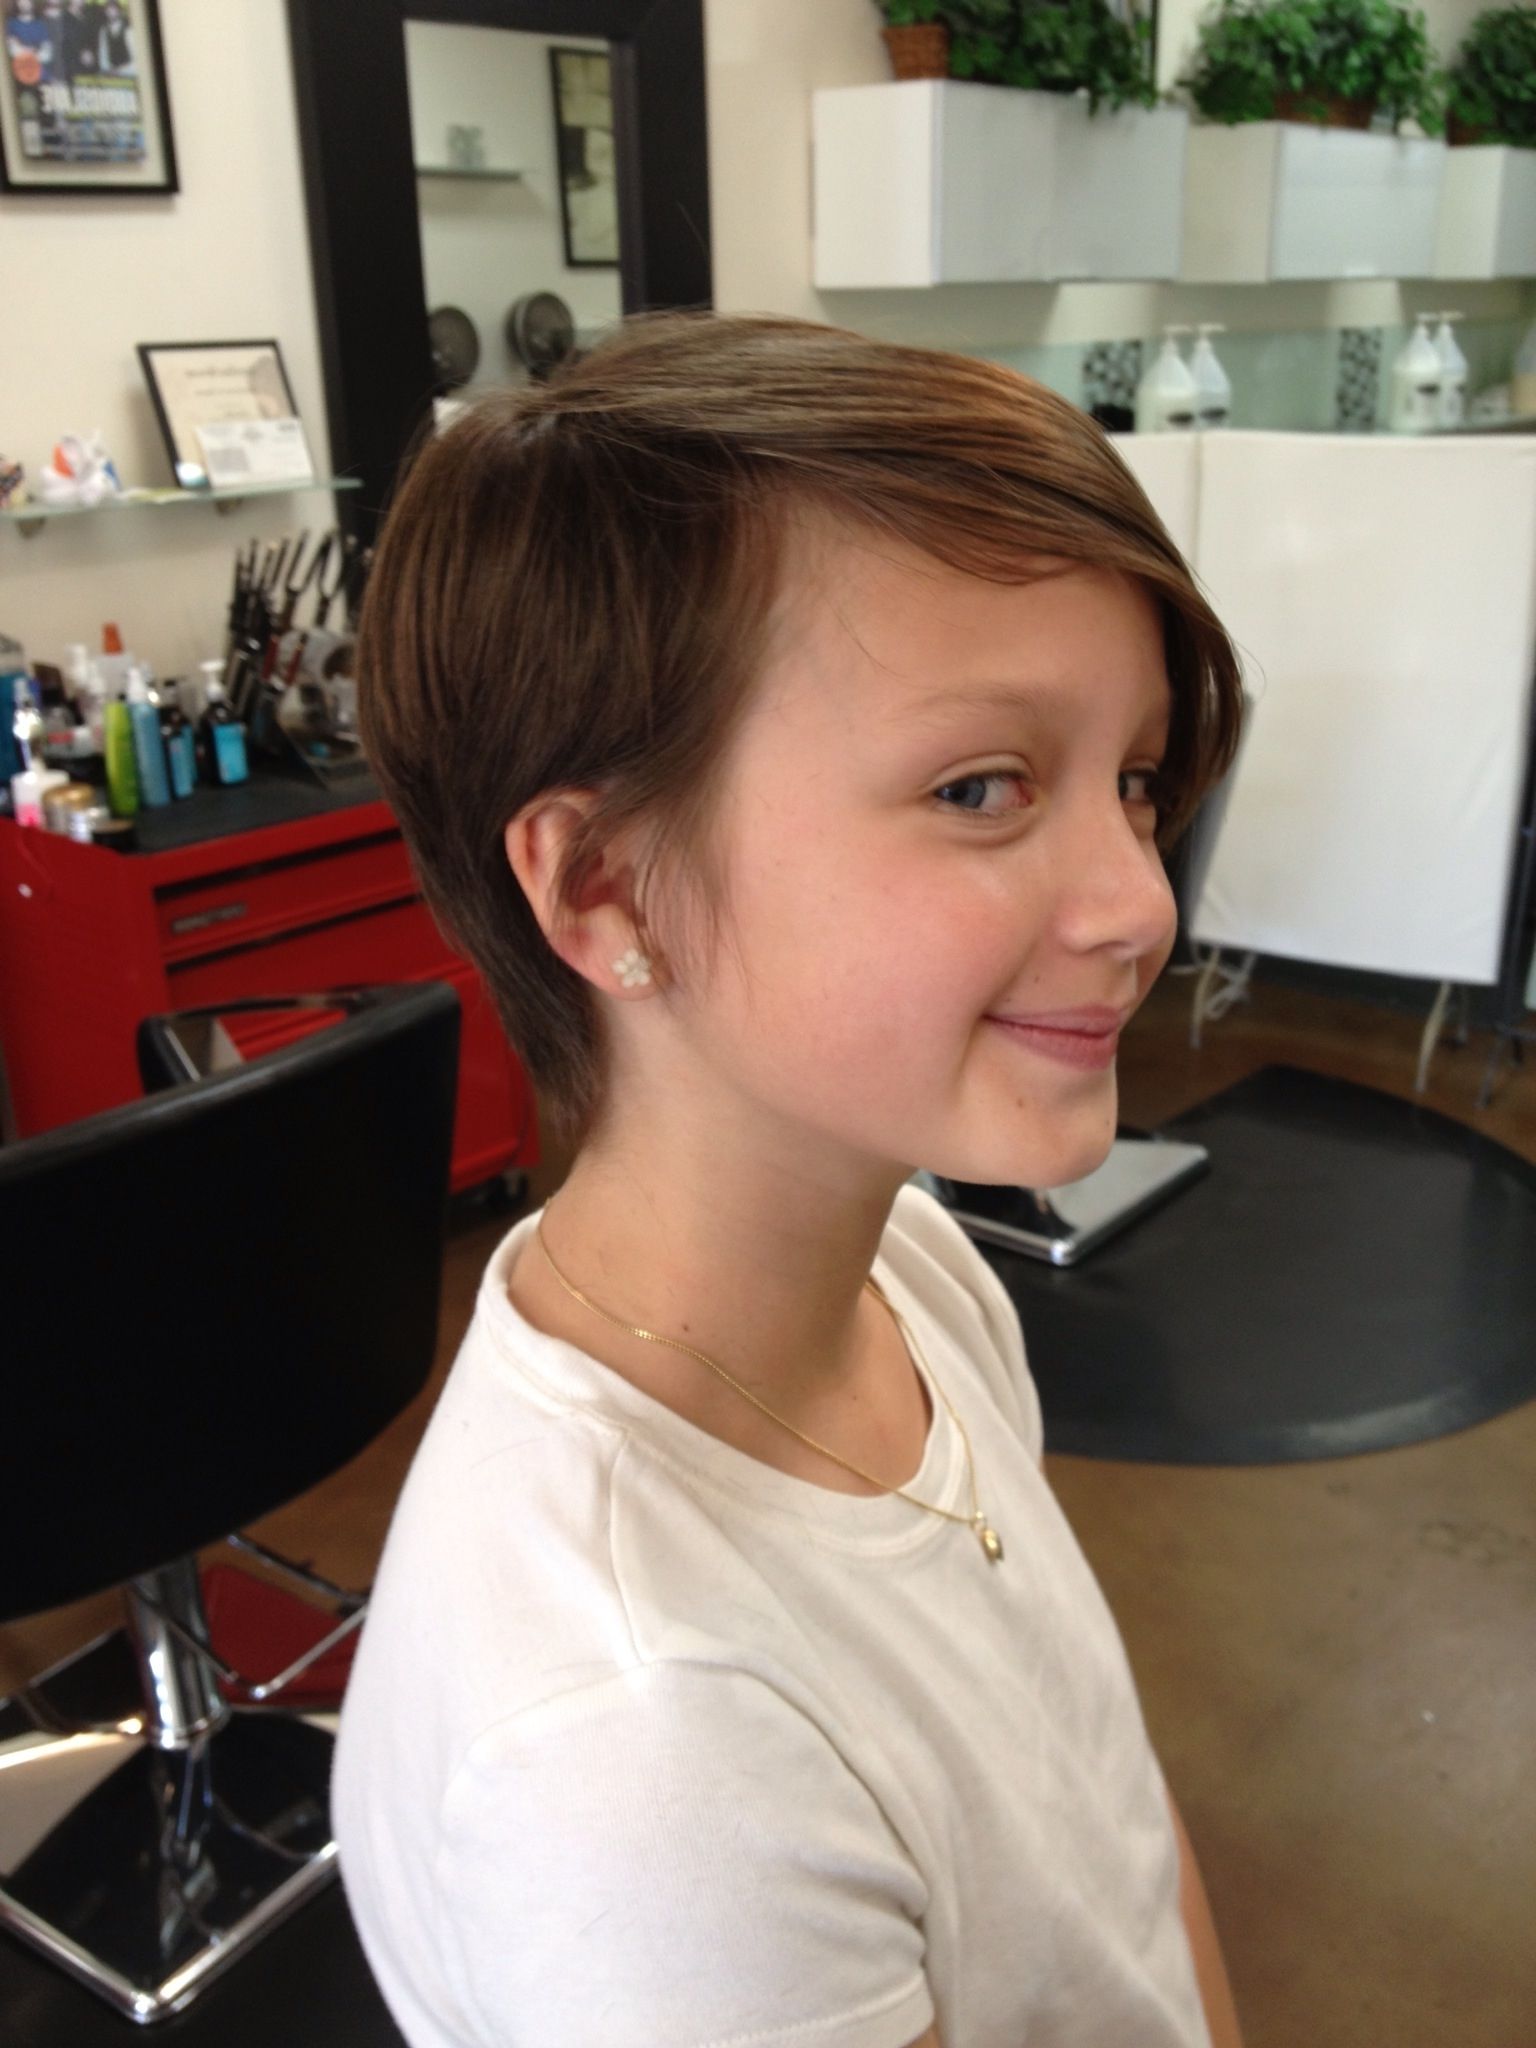 Cool Pixie Cut For A Tween. | Hairstyles Short/pixie | Pinterest Throughout Most Recently Short Pixie Hairstyles For Little Girls (Photo 7 of 15)